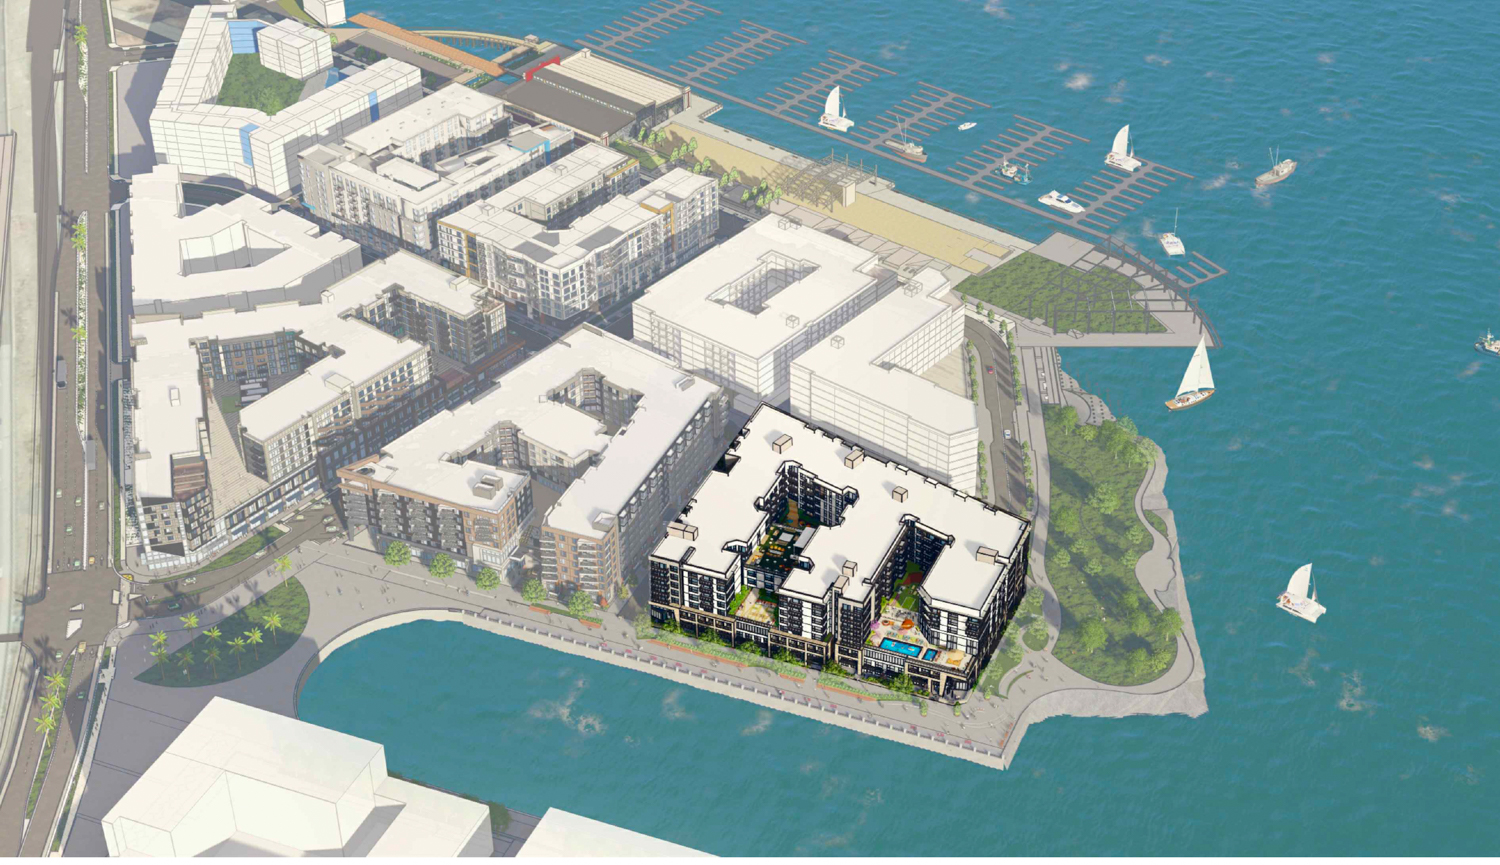 Parcel J at 37 8th Avenue in Brooklyn Basin aerial perspective, design by TSM Architects